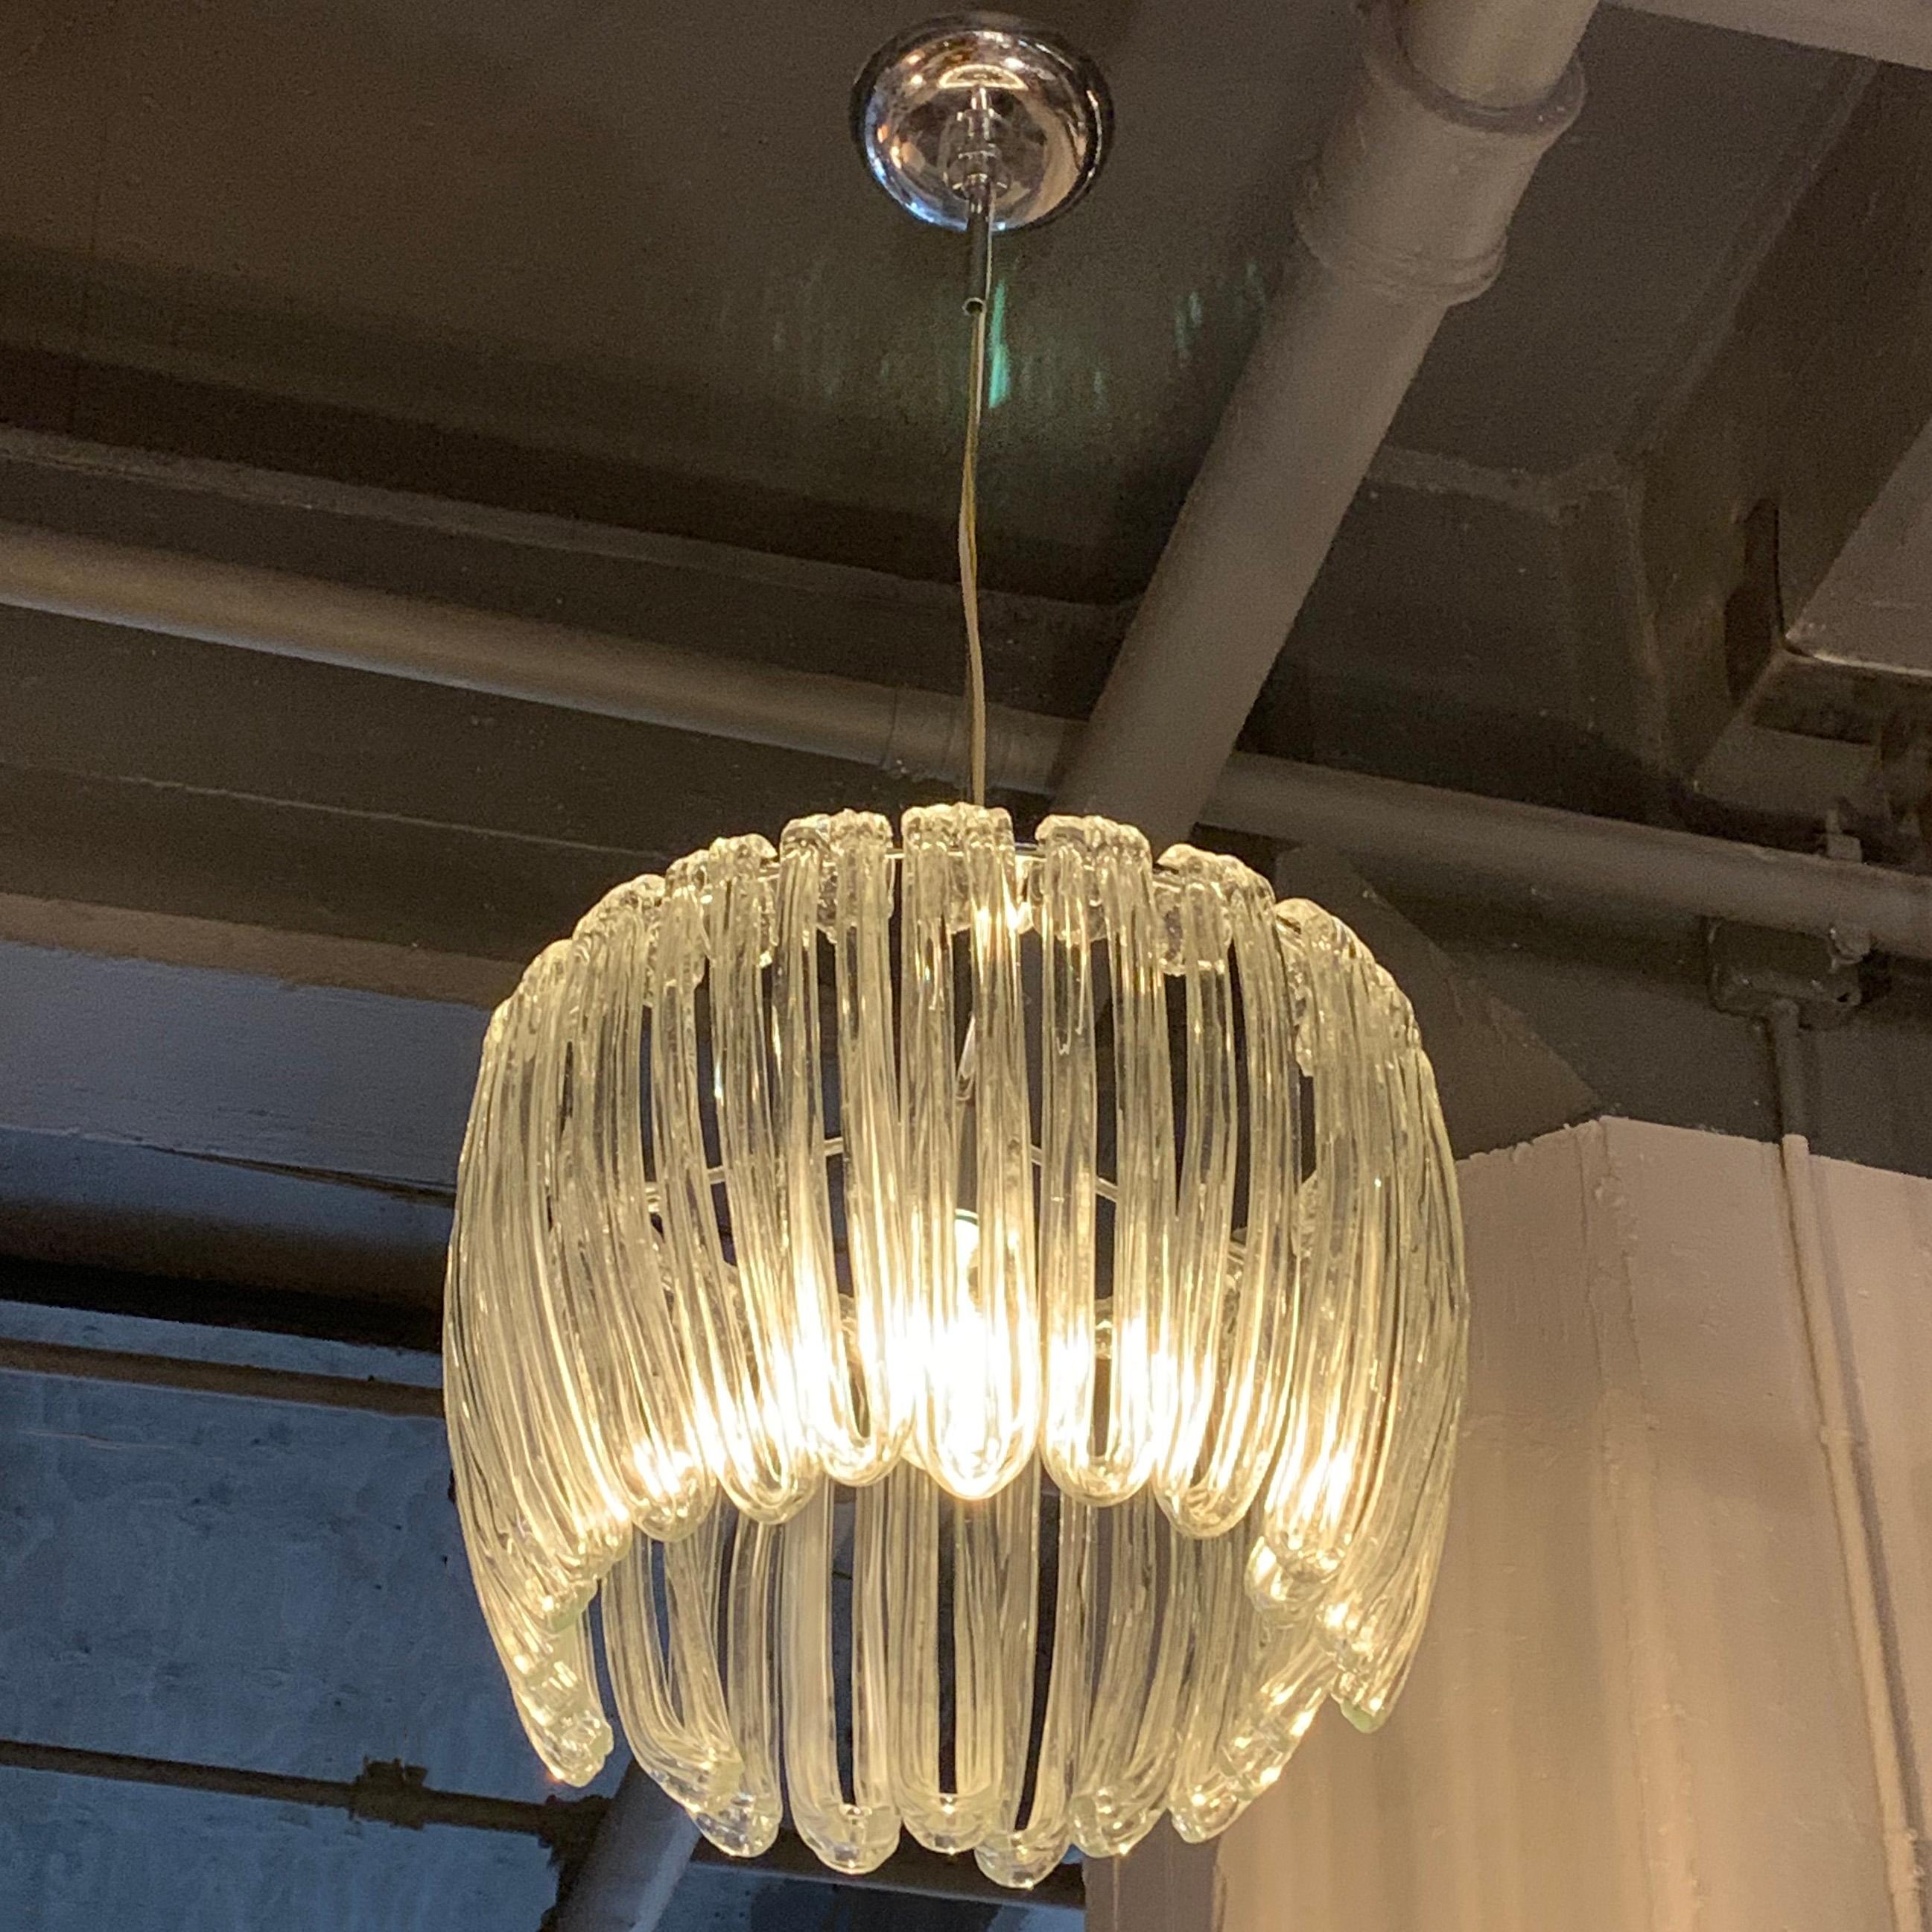 Modernist chandelier features multiple, organically shaped, clear blown glass tentacles that rest on a chrome frame resembling a jellyfish. The shade measures 17 inches diameter x 16 inches height. The pendant accepts one medium socket bulb up to